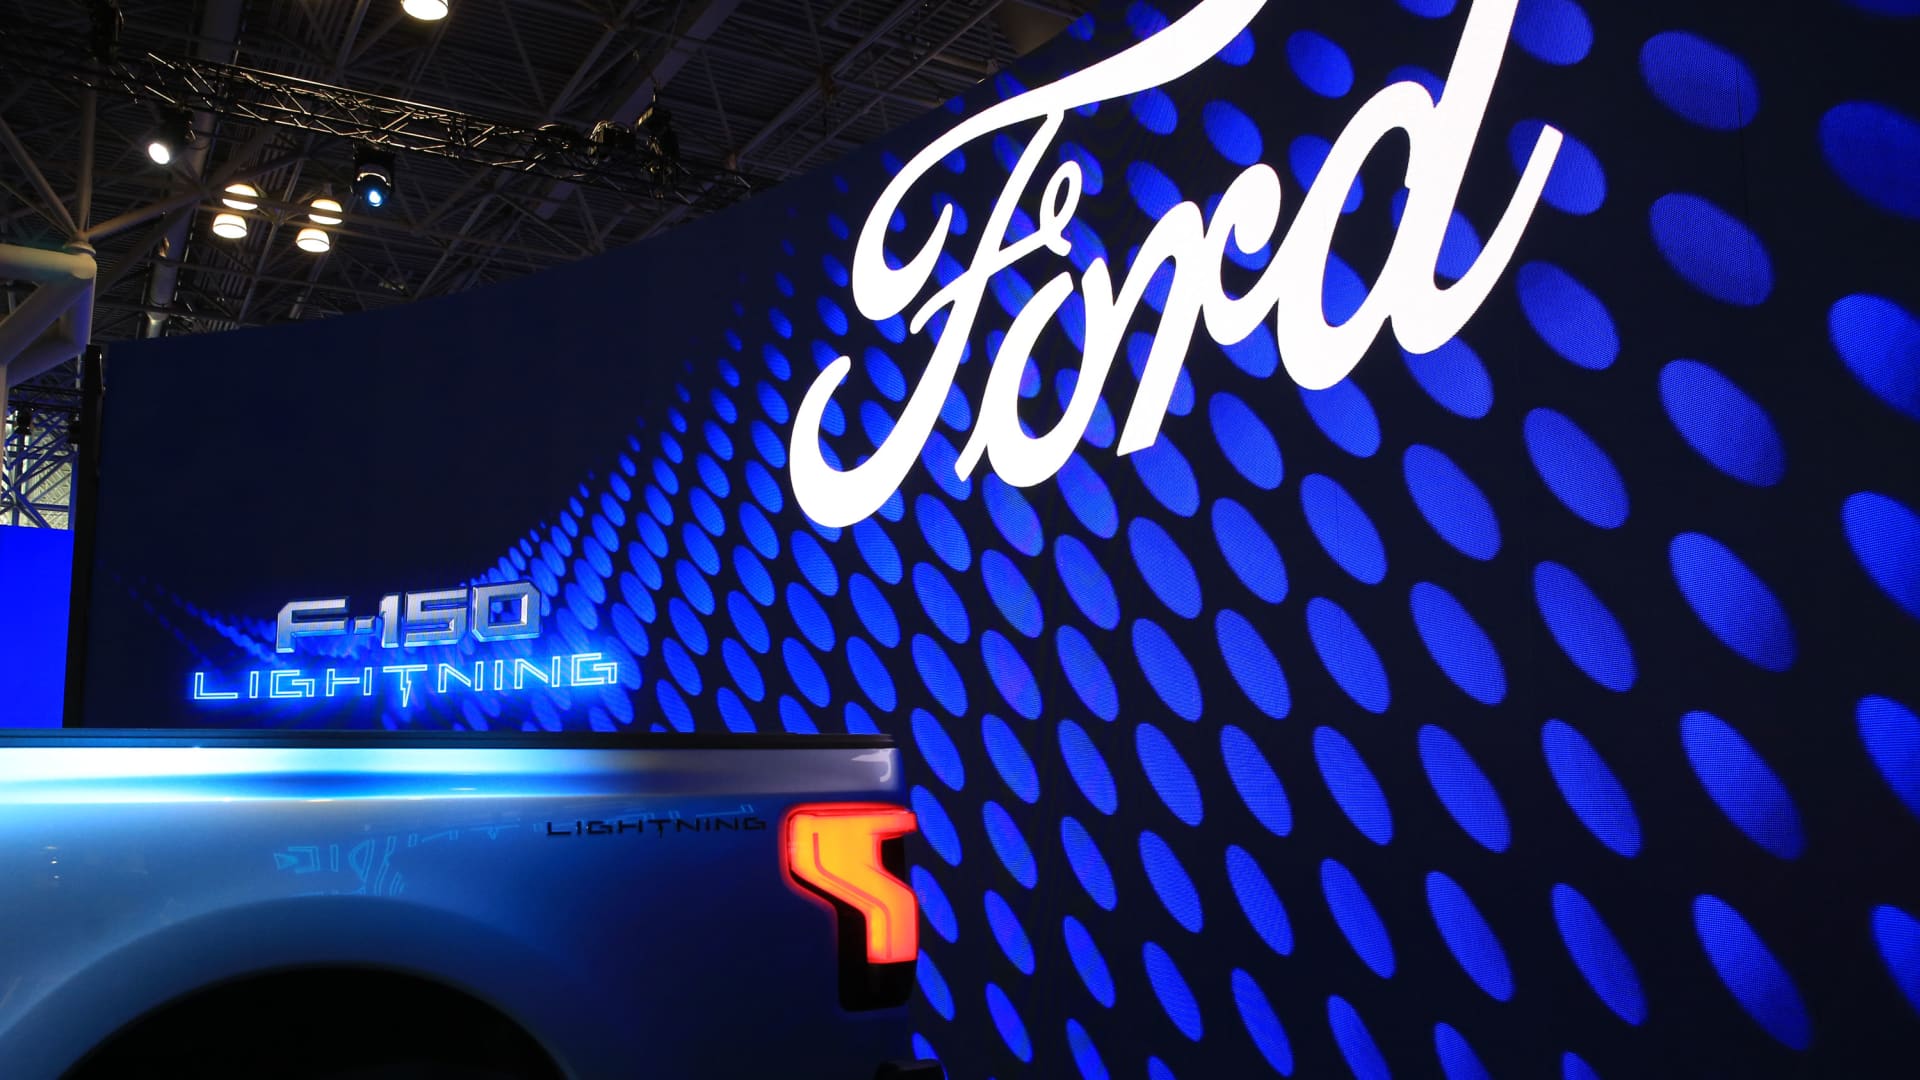 3 of our stocks, including Ford, are in the news.  Here is the club’s take on the headlines